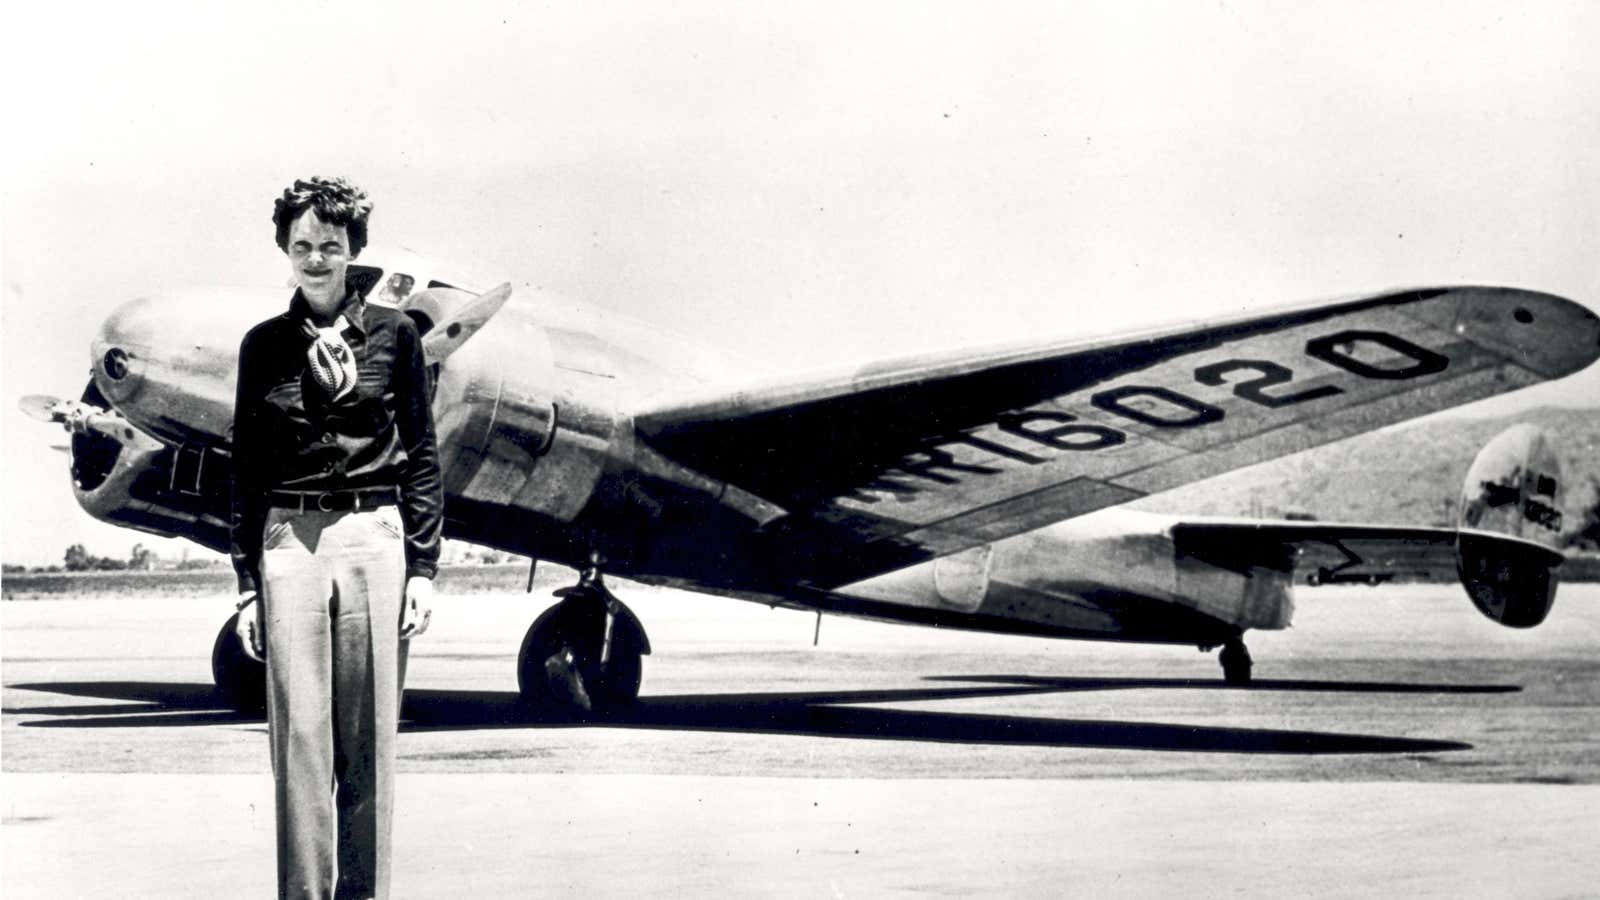 Amelia Earhart and the Lockheed Electra she flew over the Pacific.